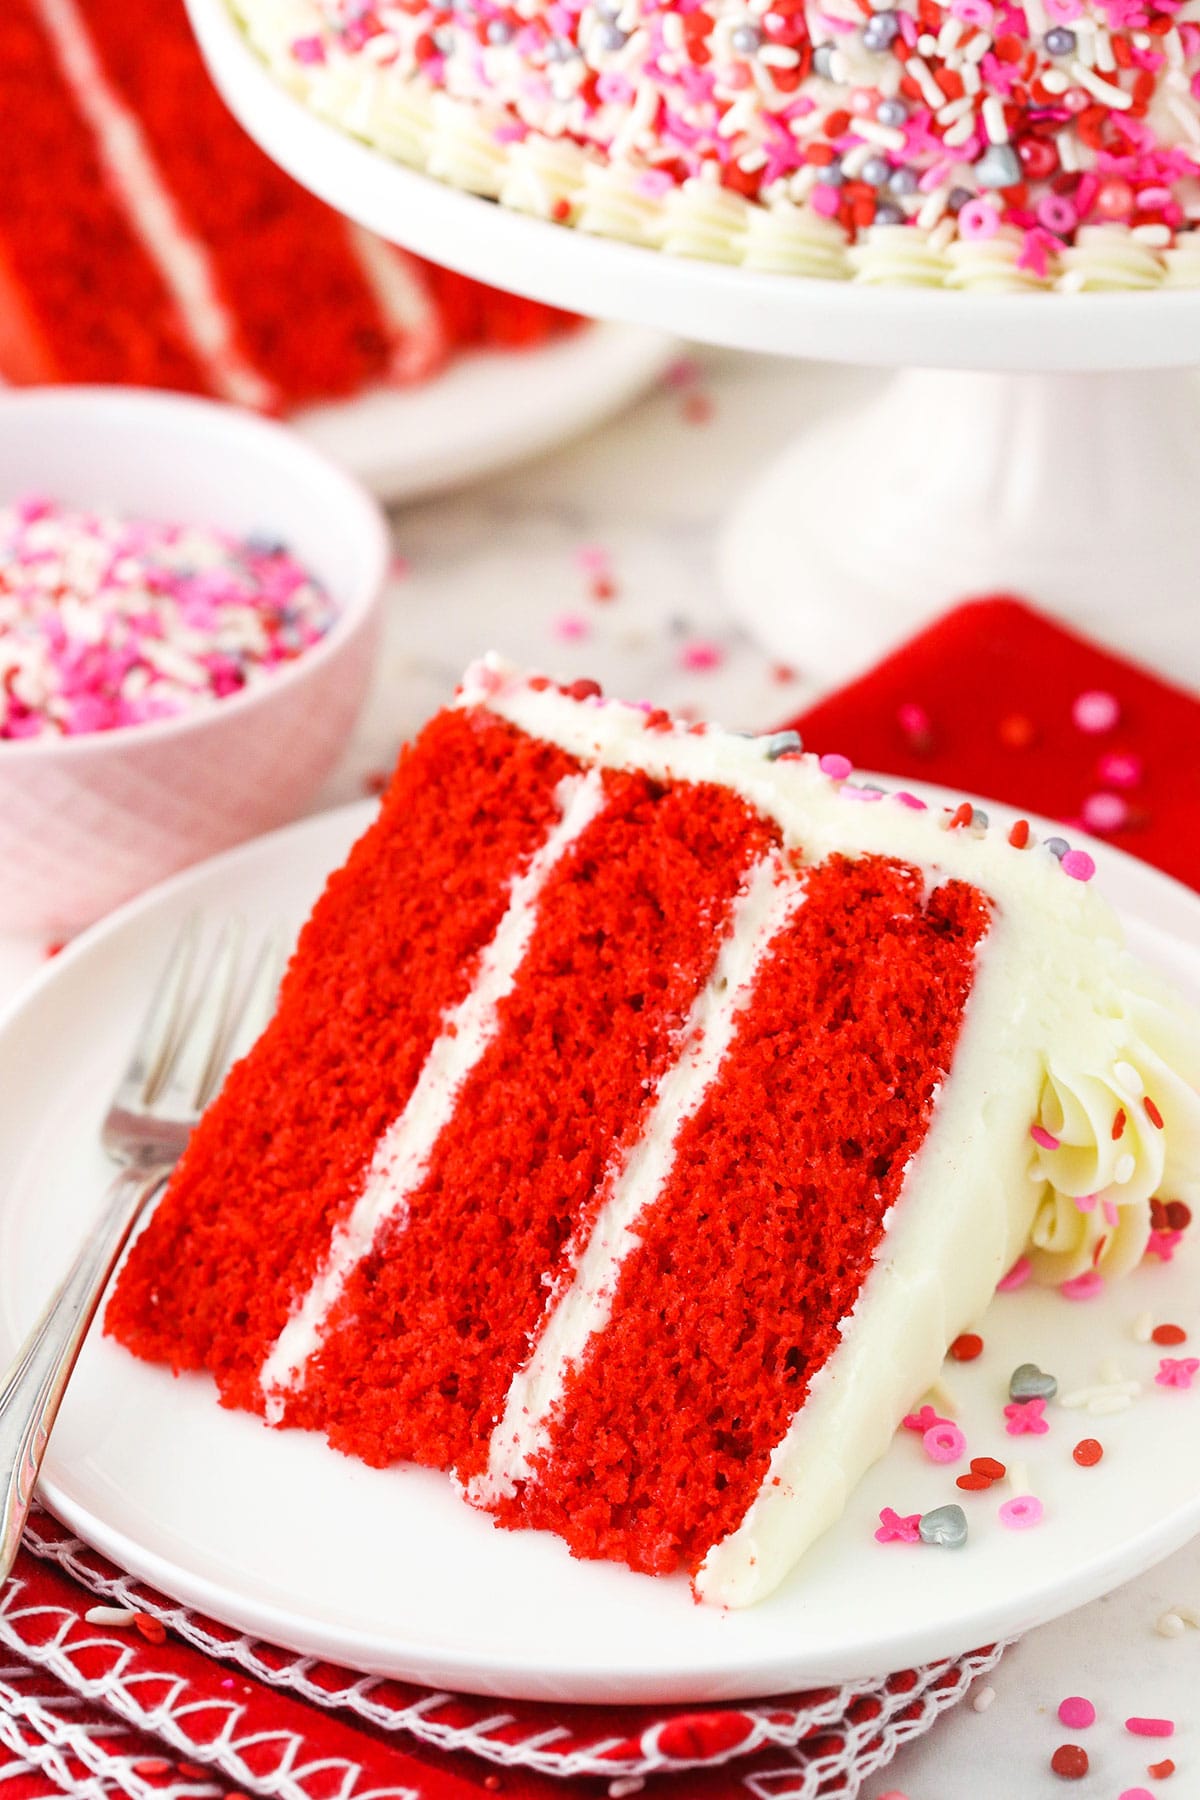 A piece of red velvet layer cake on a plate with a metal dessert fork